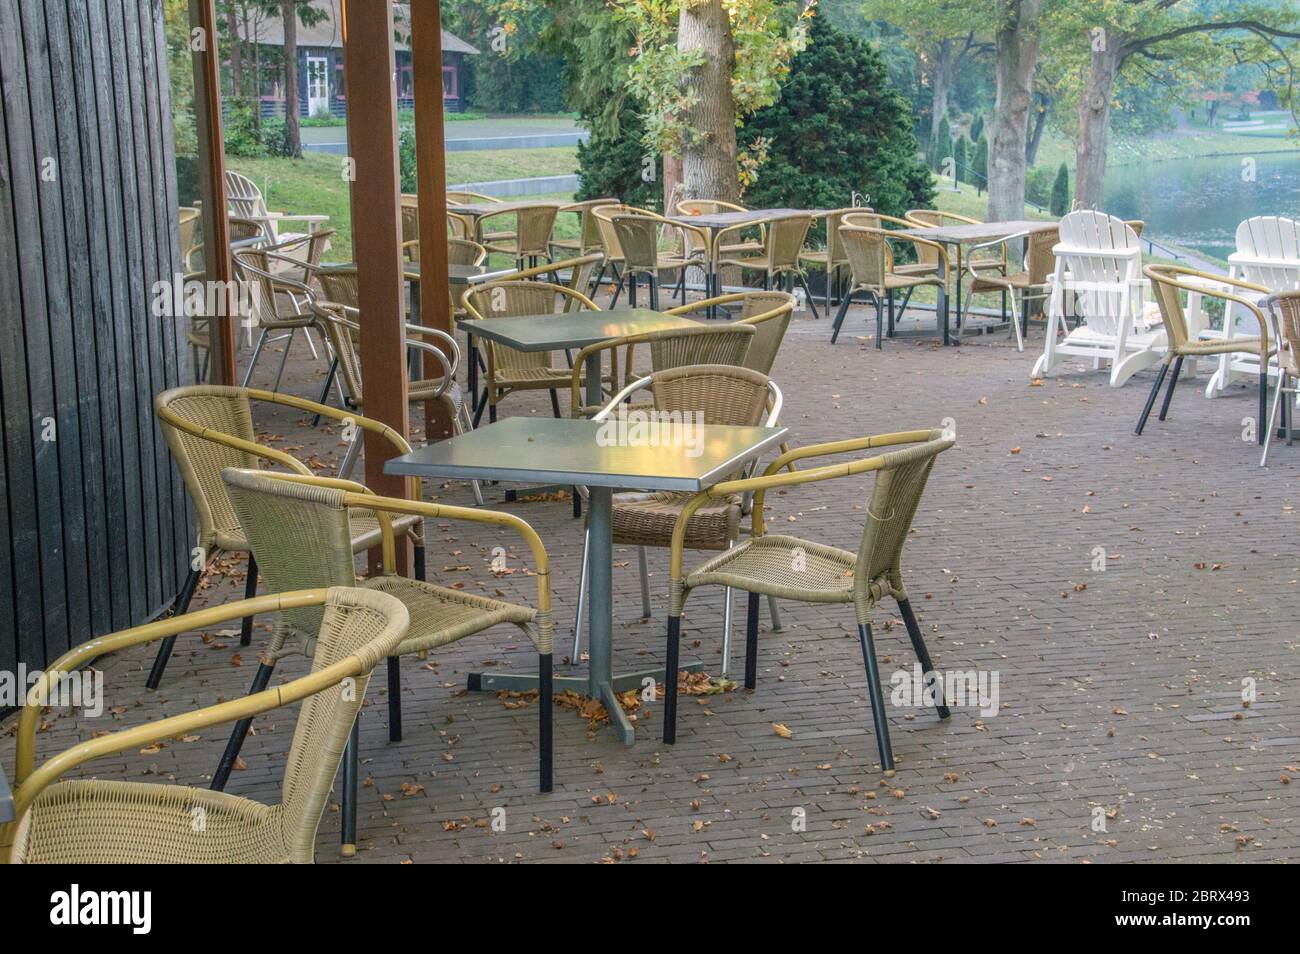 Terrace At The Apenheul Zoo At Apeldoorn The Netherlands 2018 Stock Photo